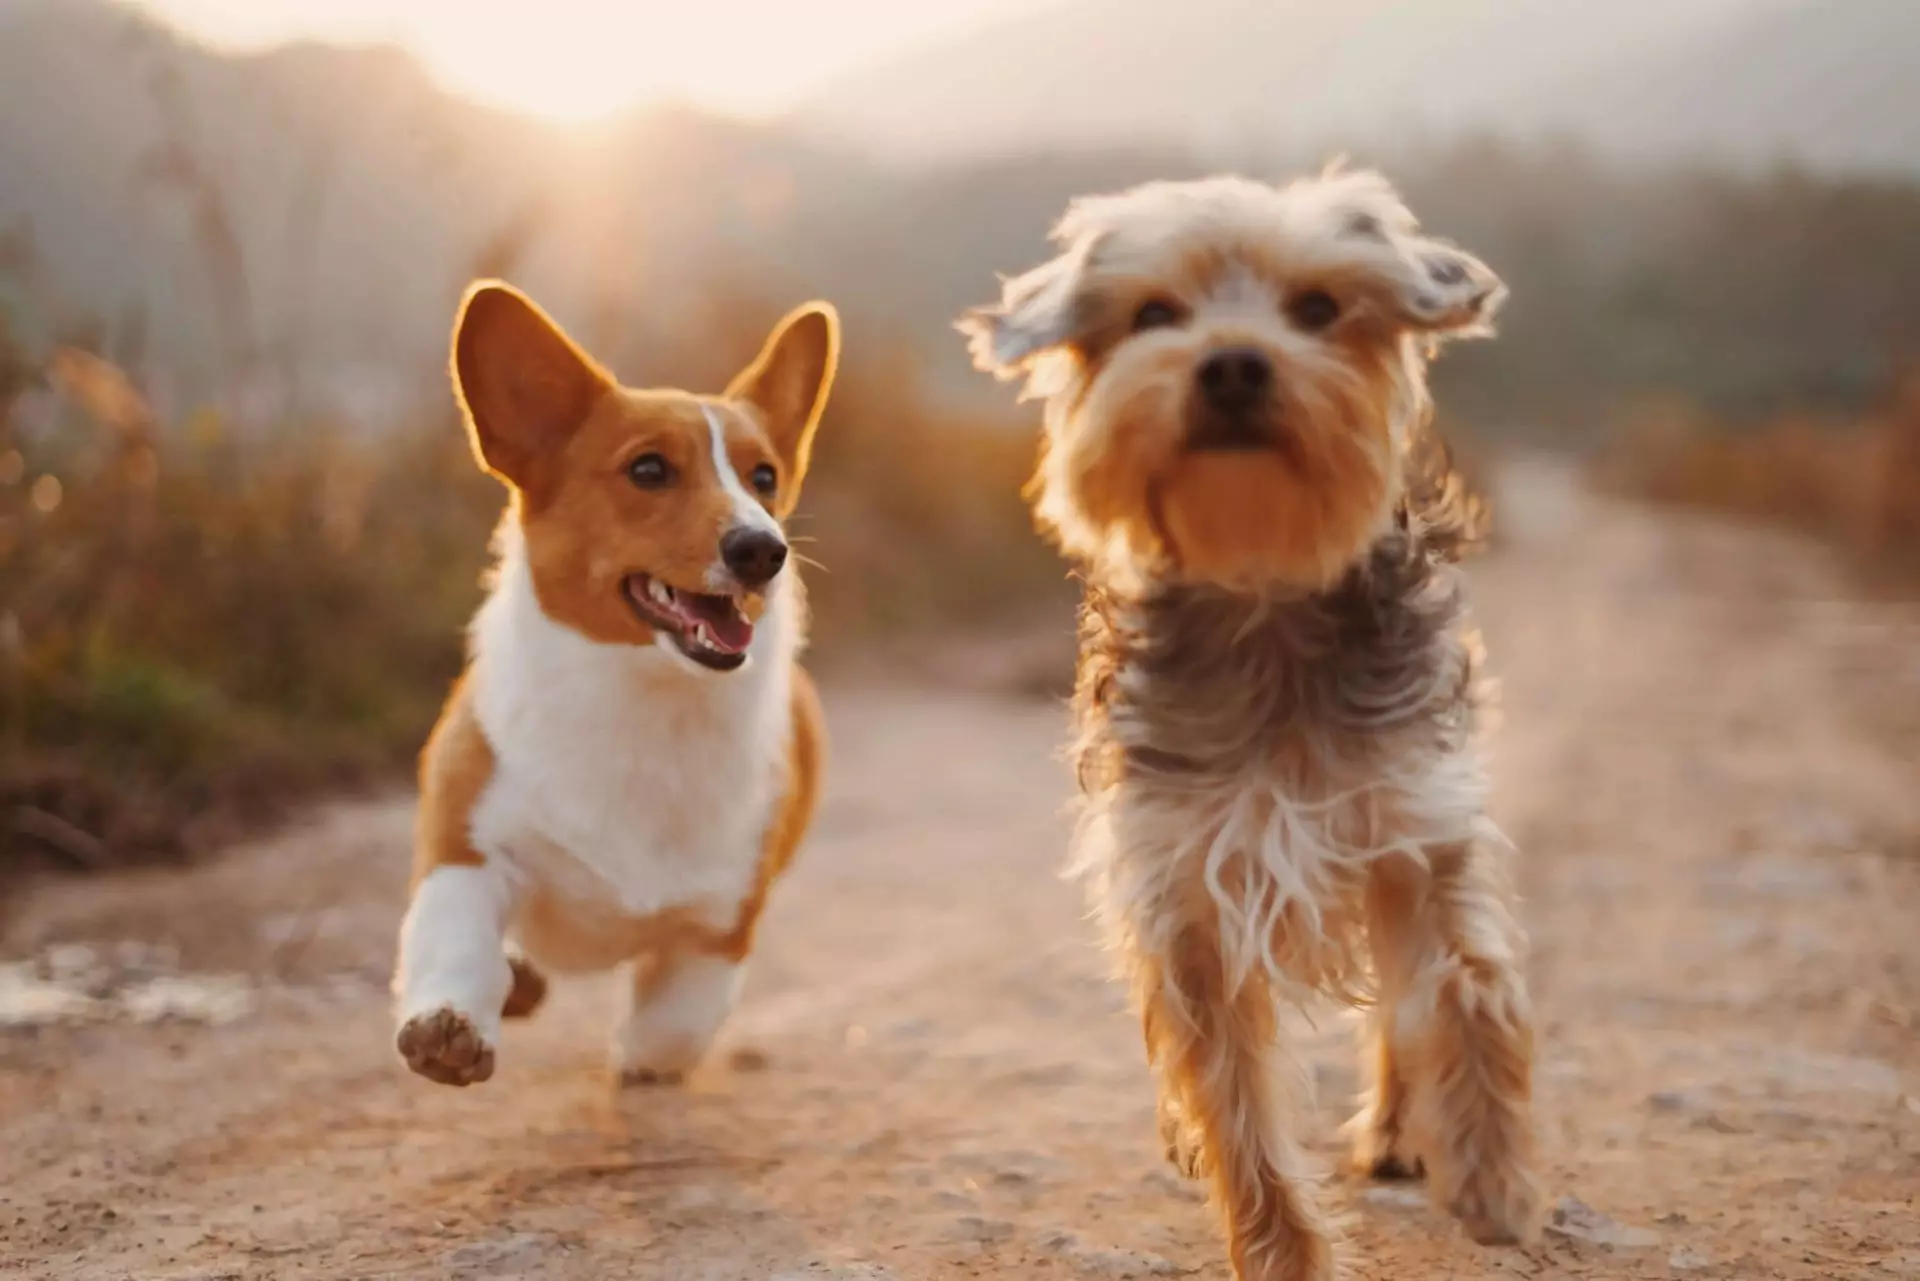 two dogs running alongside each other